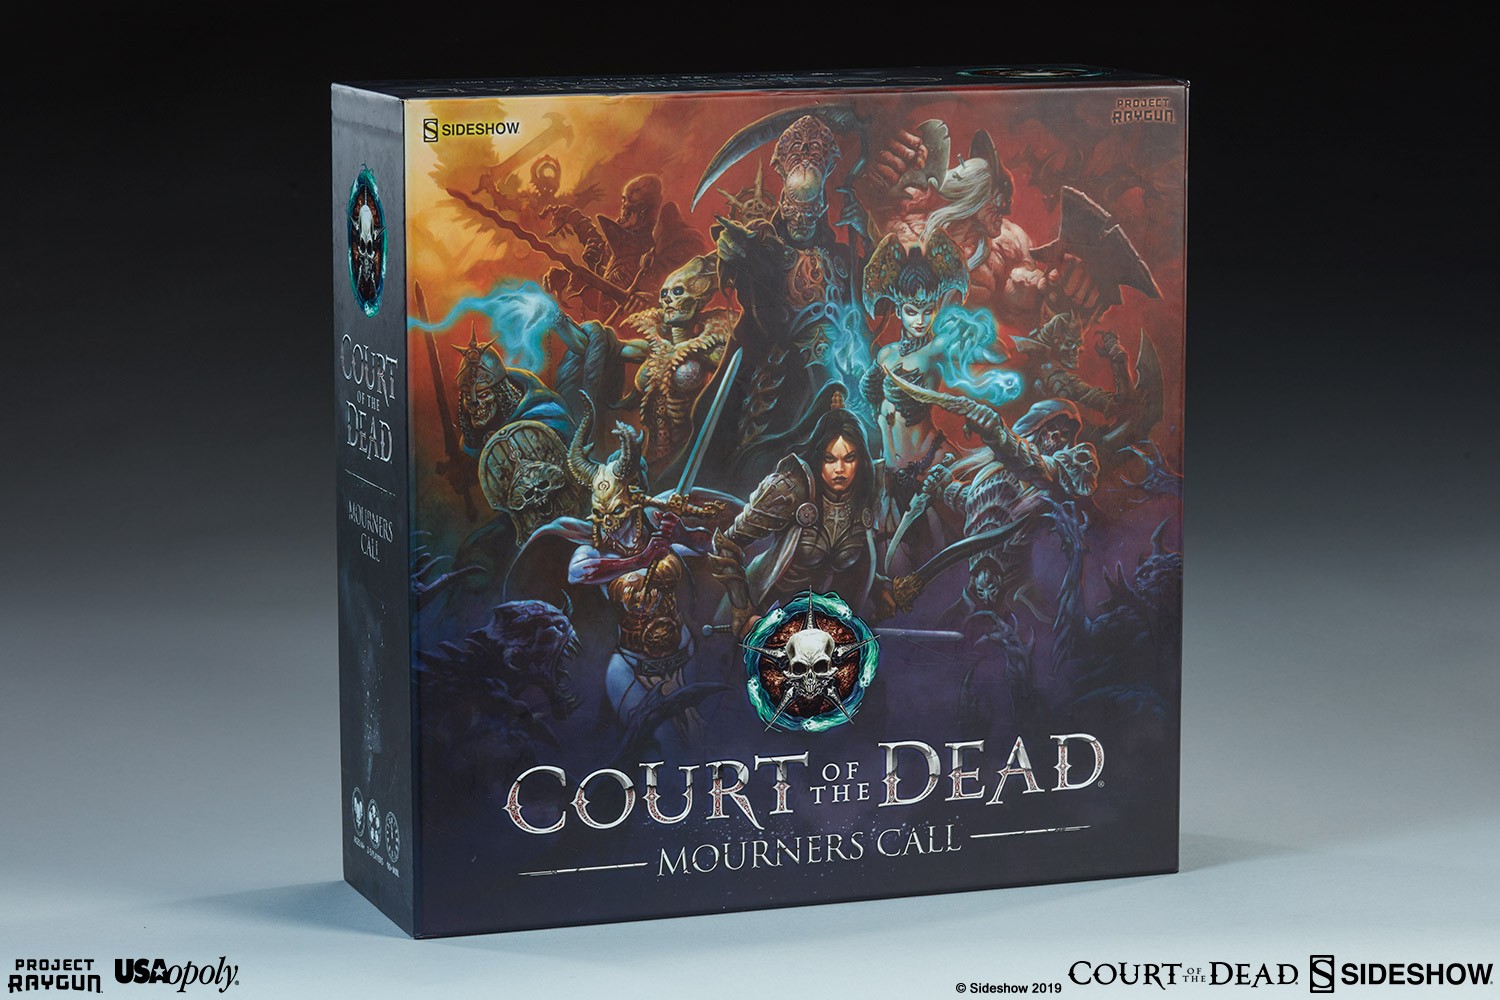 Court of the Dead Mourner's Call Game Exclusive Edition (Prototype Shown) View 1